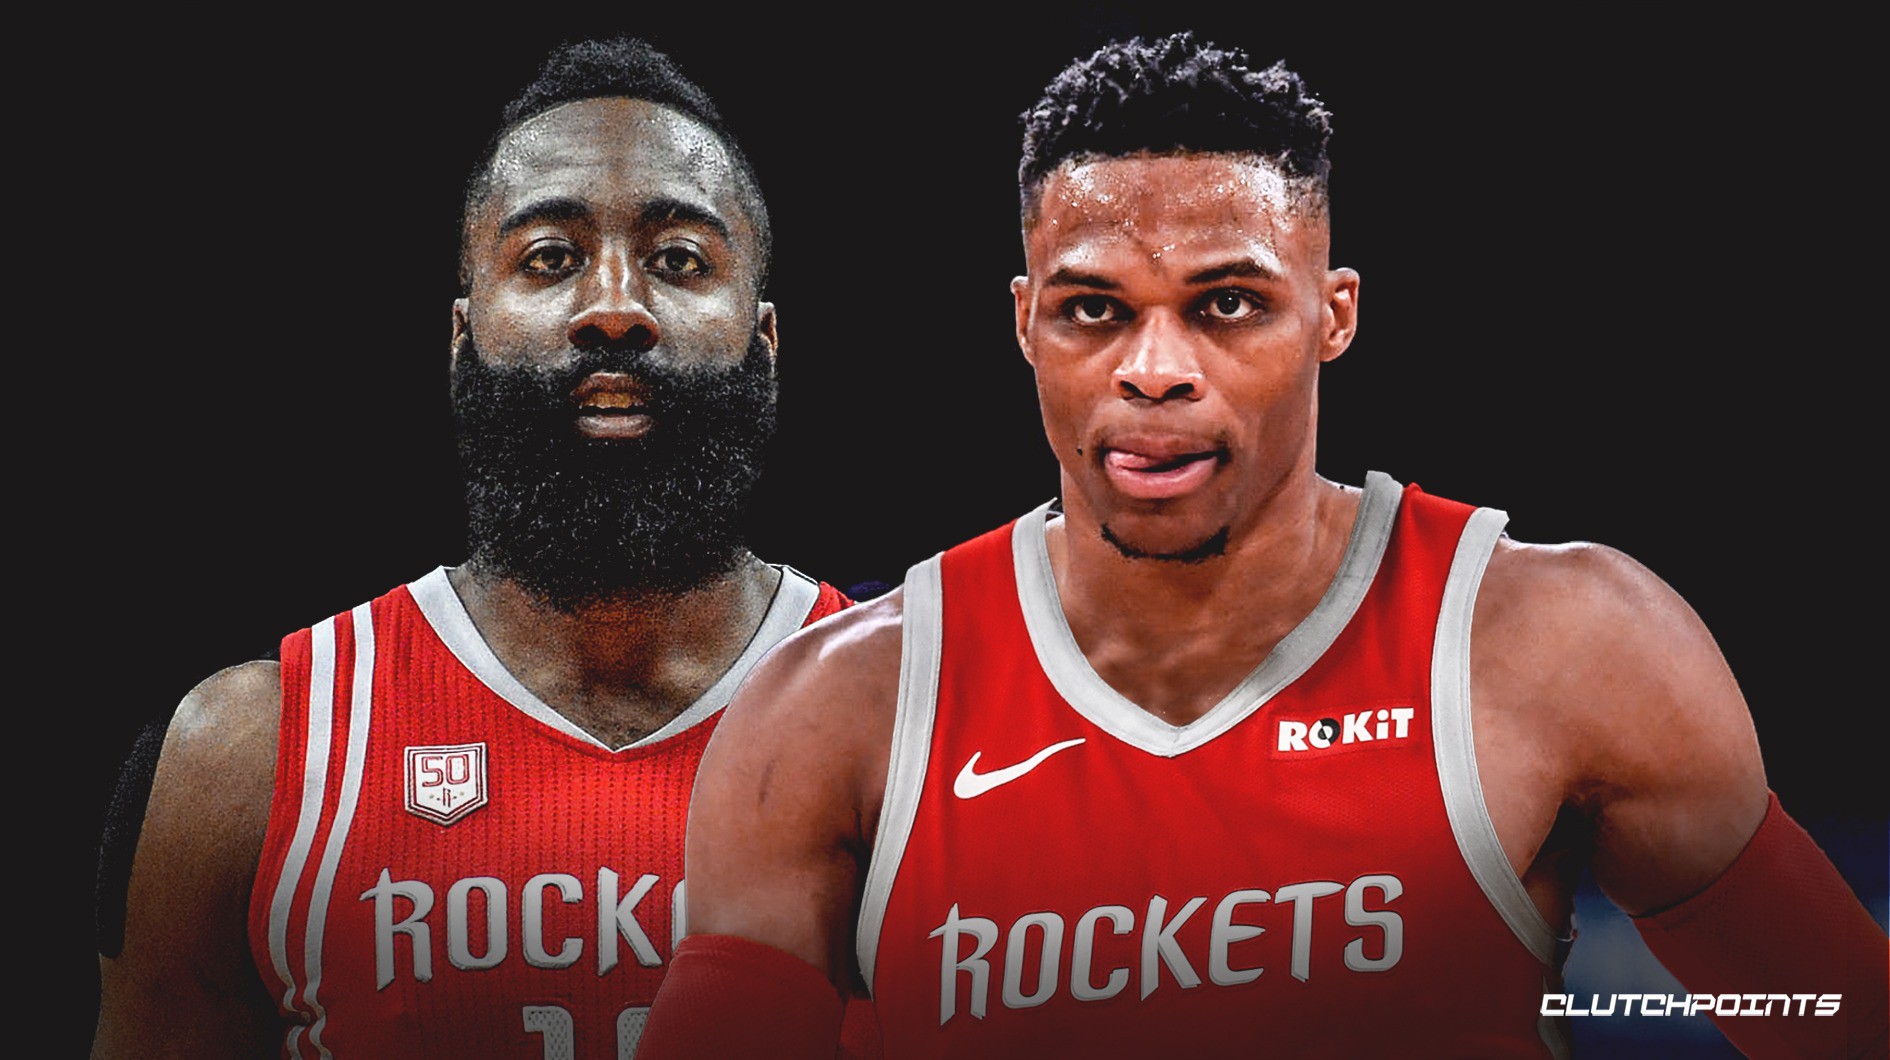 3_issues_the_Rockets_will_have_with_Russell_Westbrook_and_James_Harden